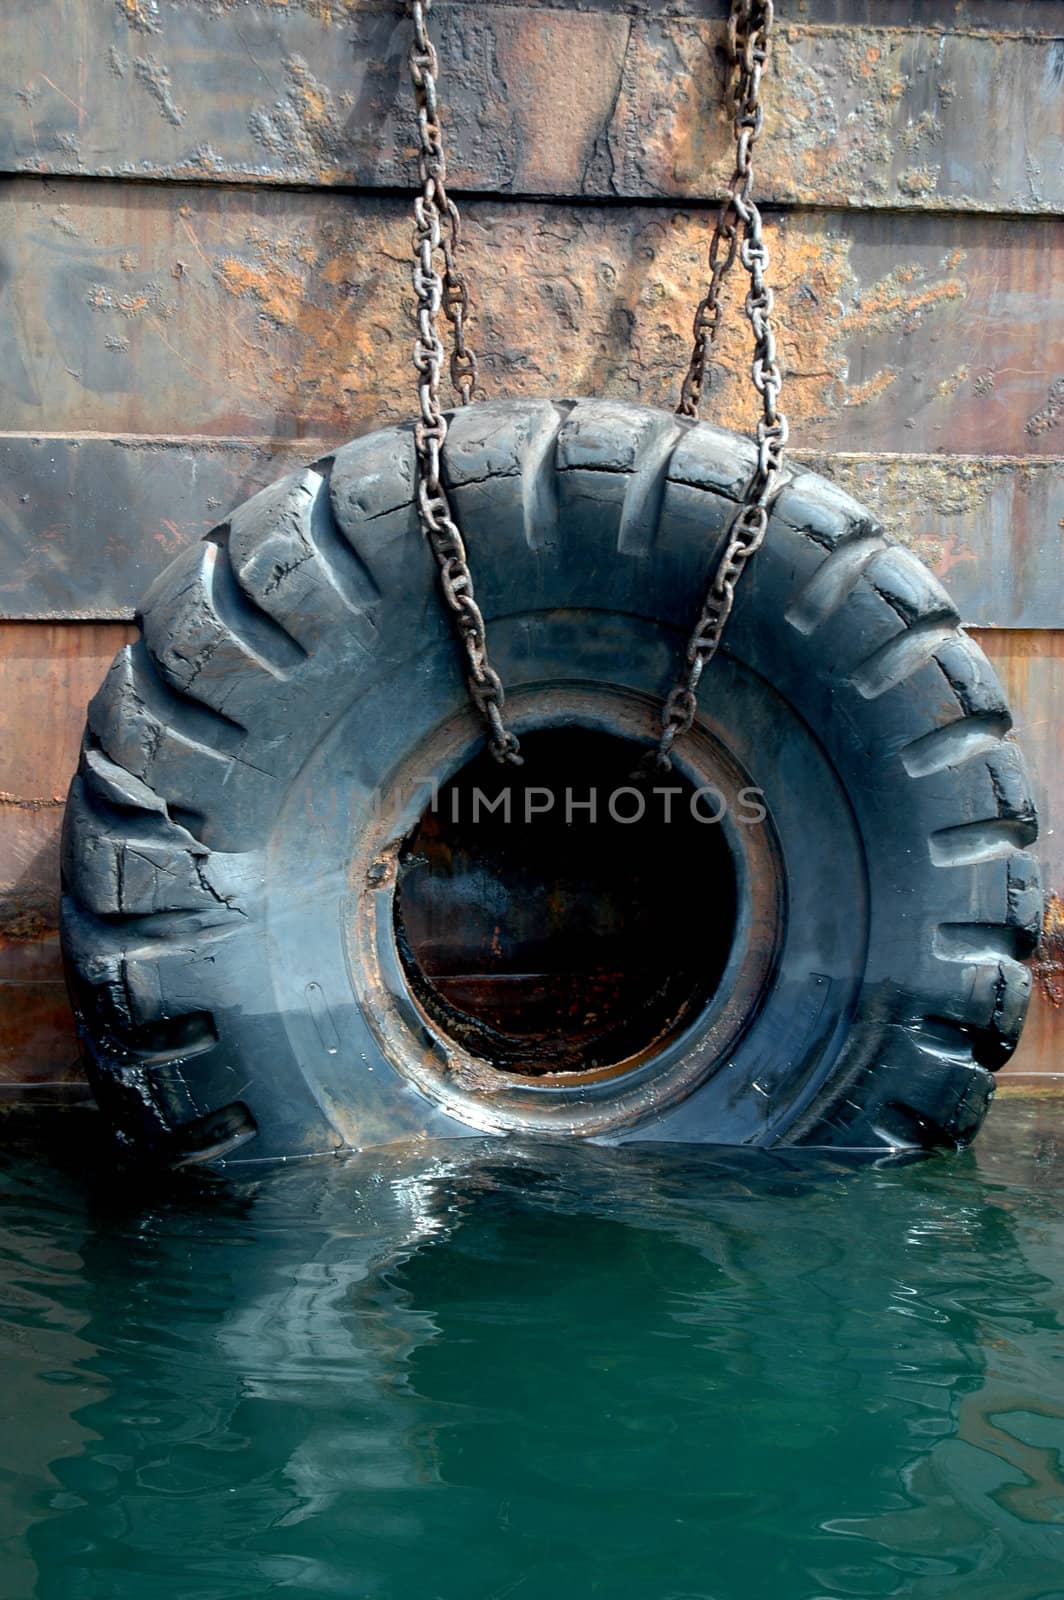 used tires on the ship by antonihalim